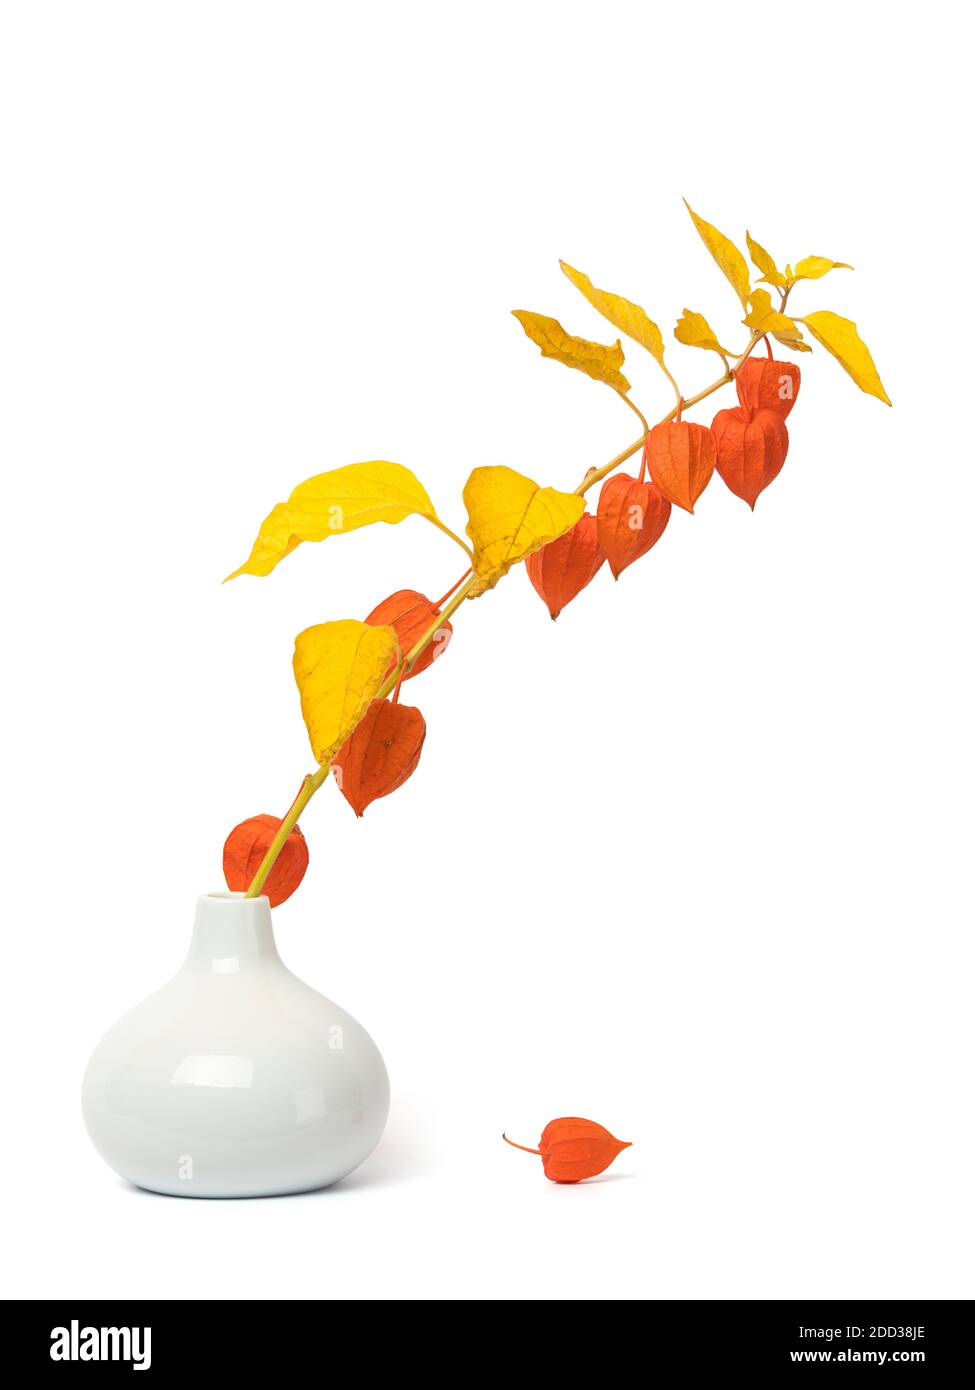 Wilting Physalis alkegengi or Chinese Lantern branch full with fruits in a vase, single husk on the ground, isolated on white background Stock Photo